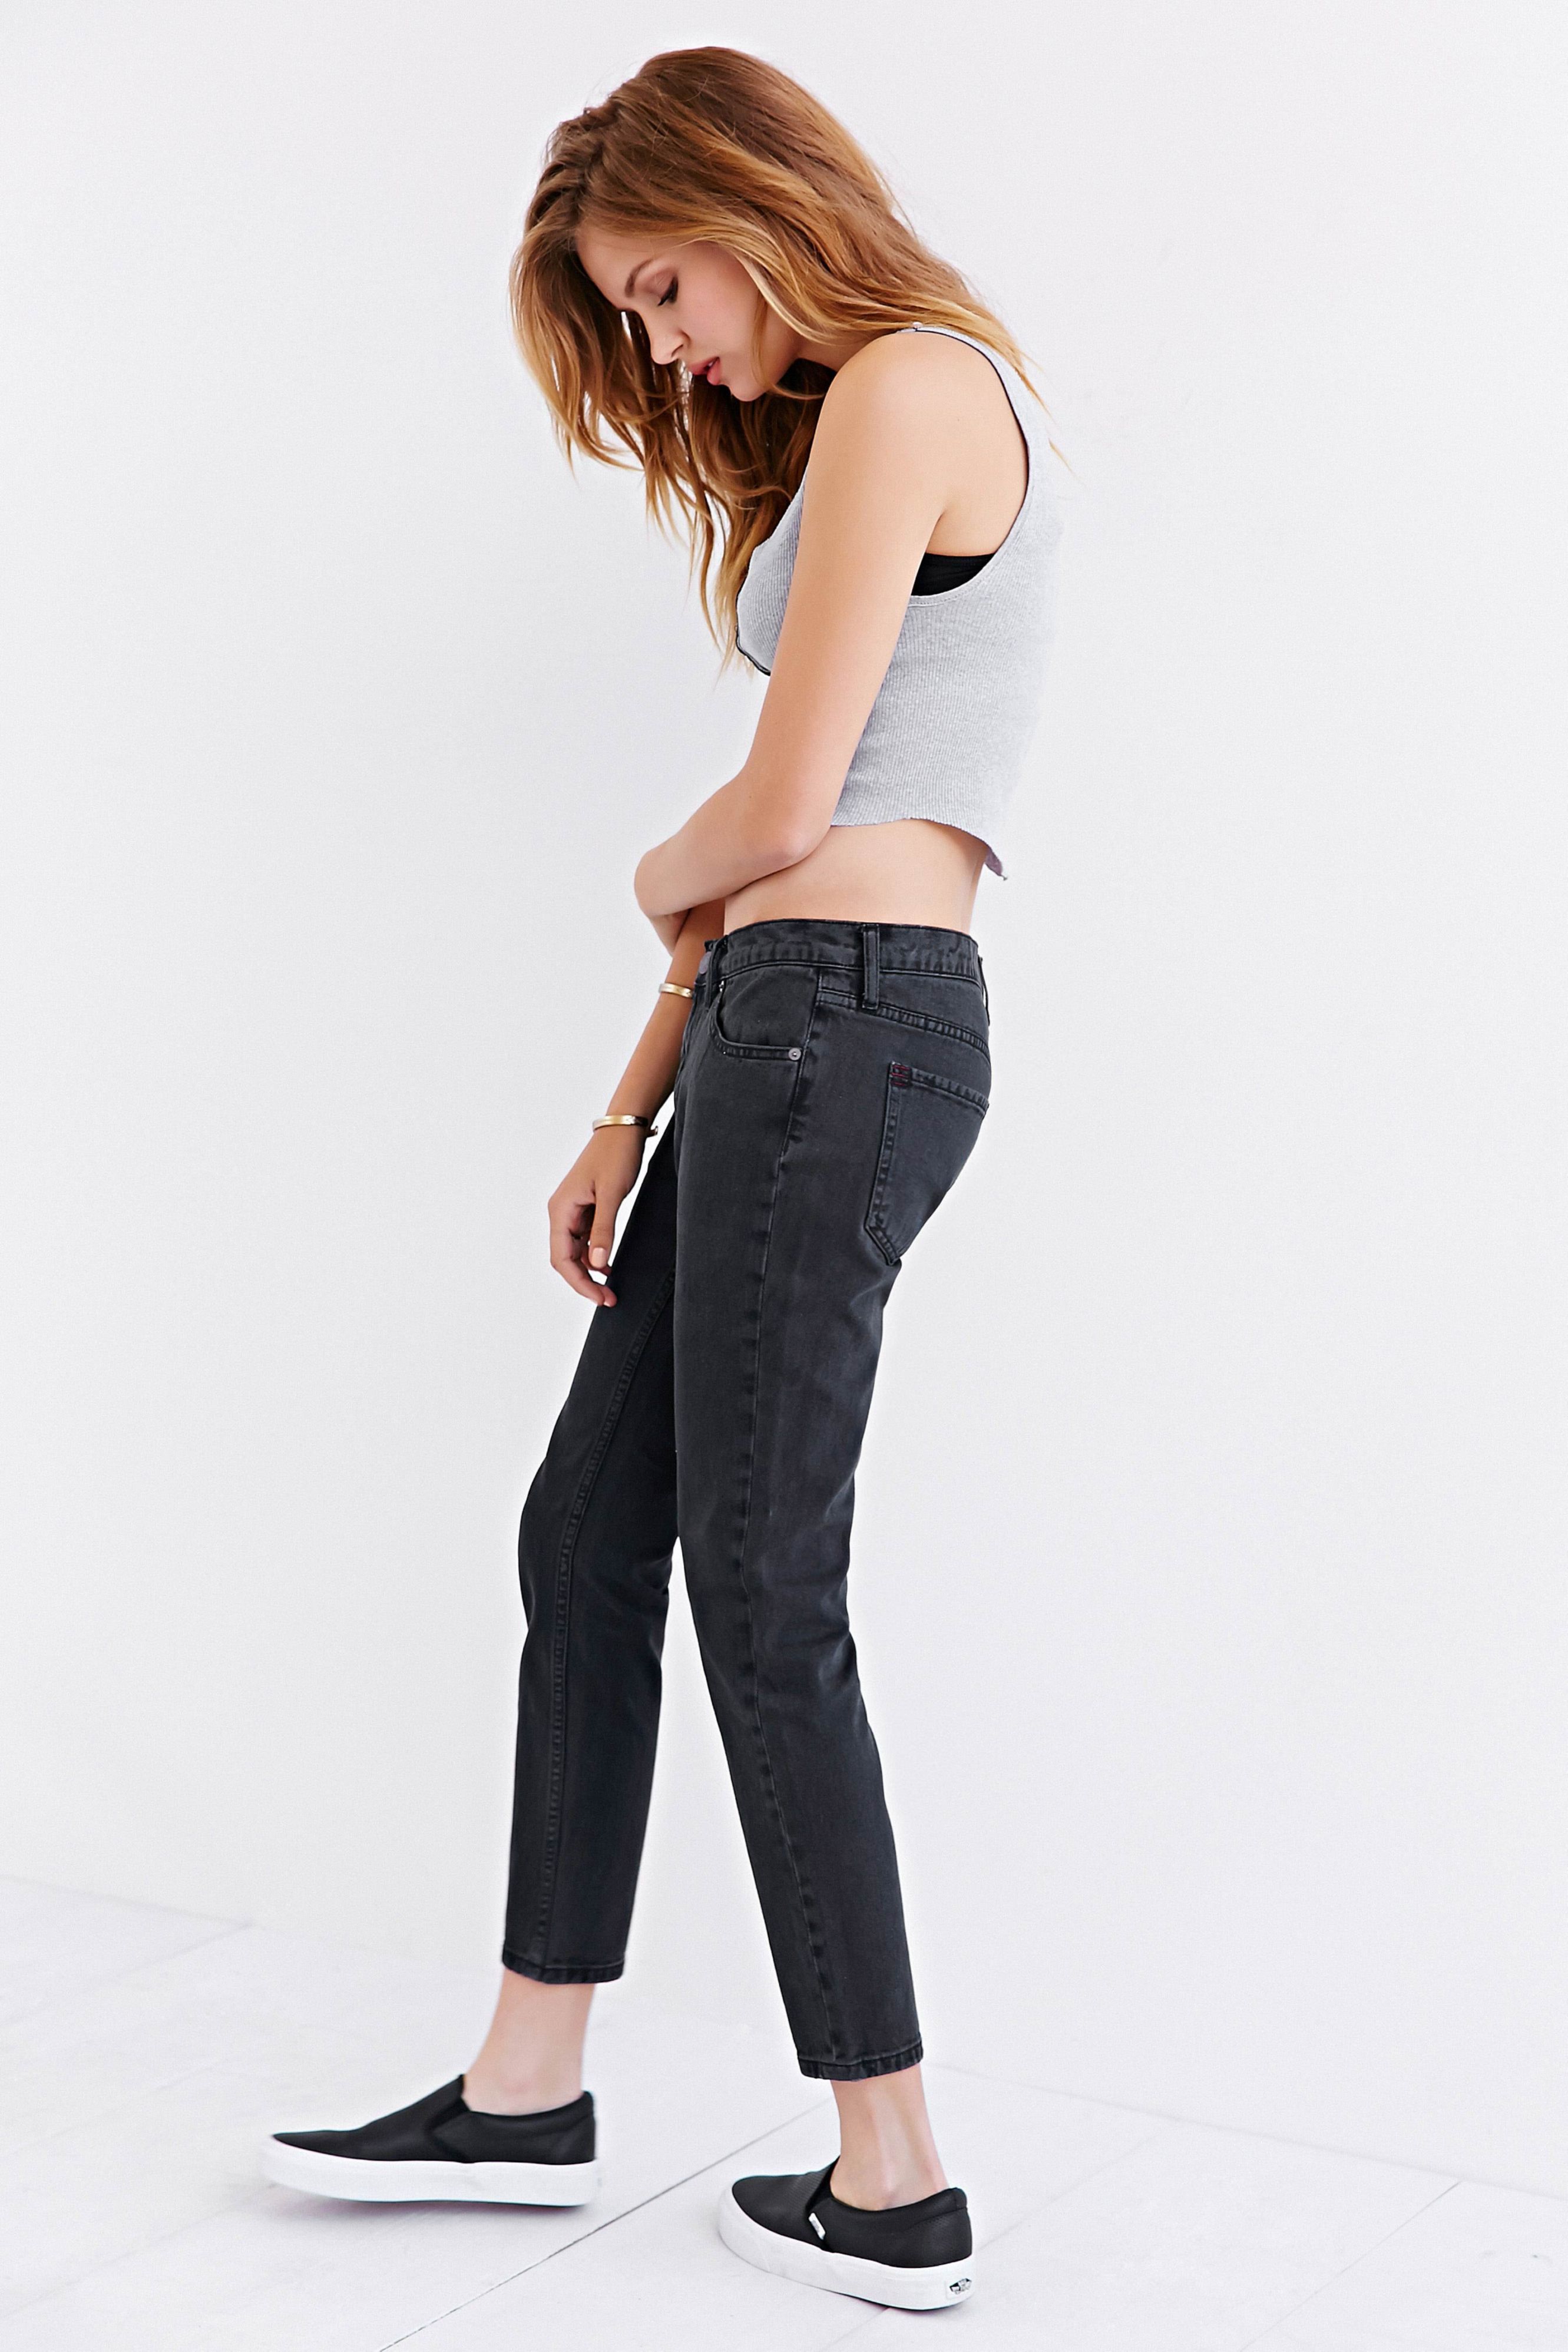 Josephine_Skriver_sexy_Urban_Outfitters_Collection_38x_HQ_40.jpg